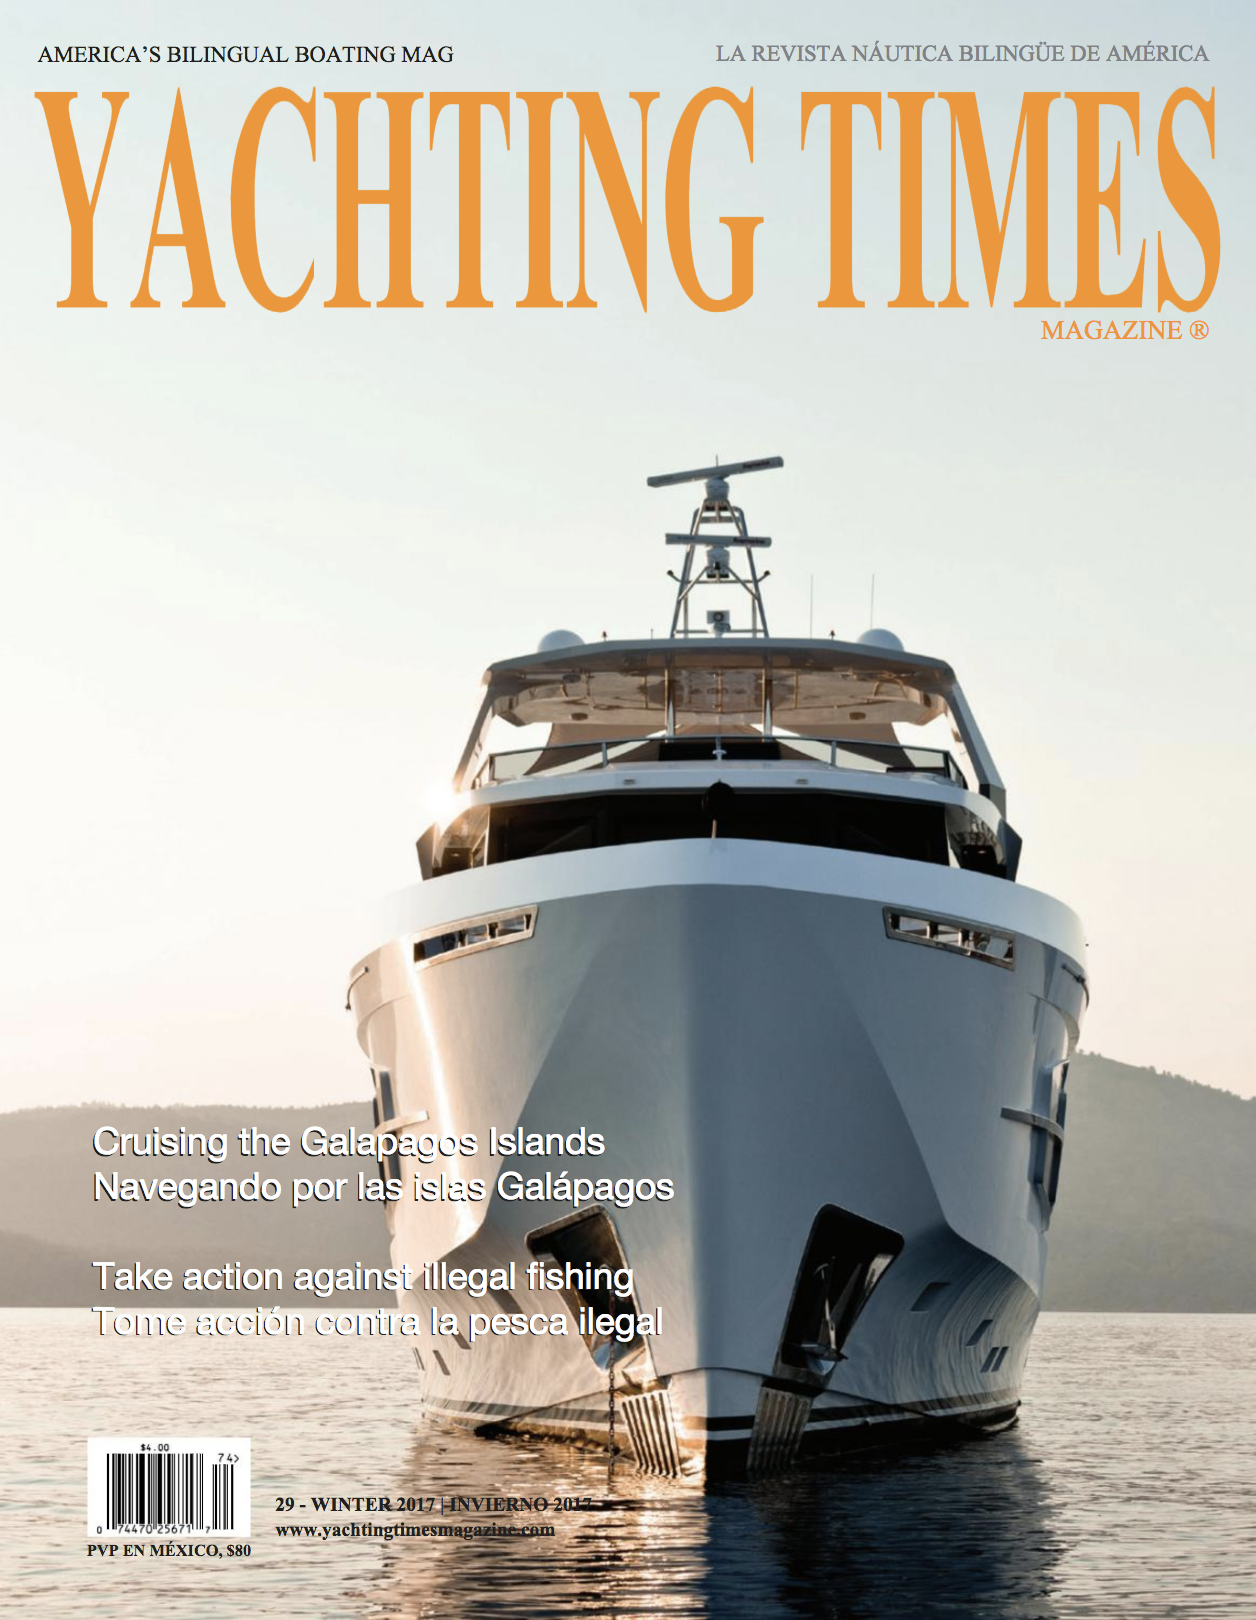 12° West - Yachting Times feature January 2018